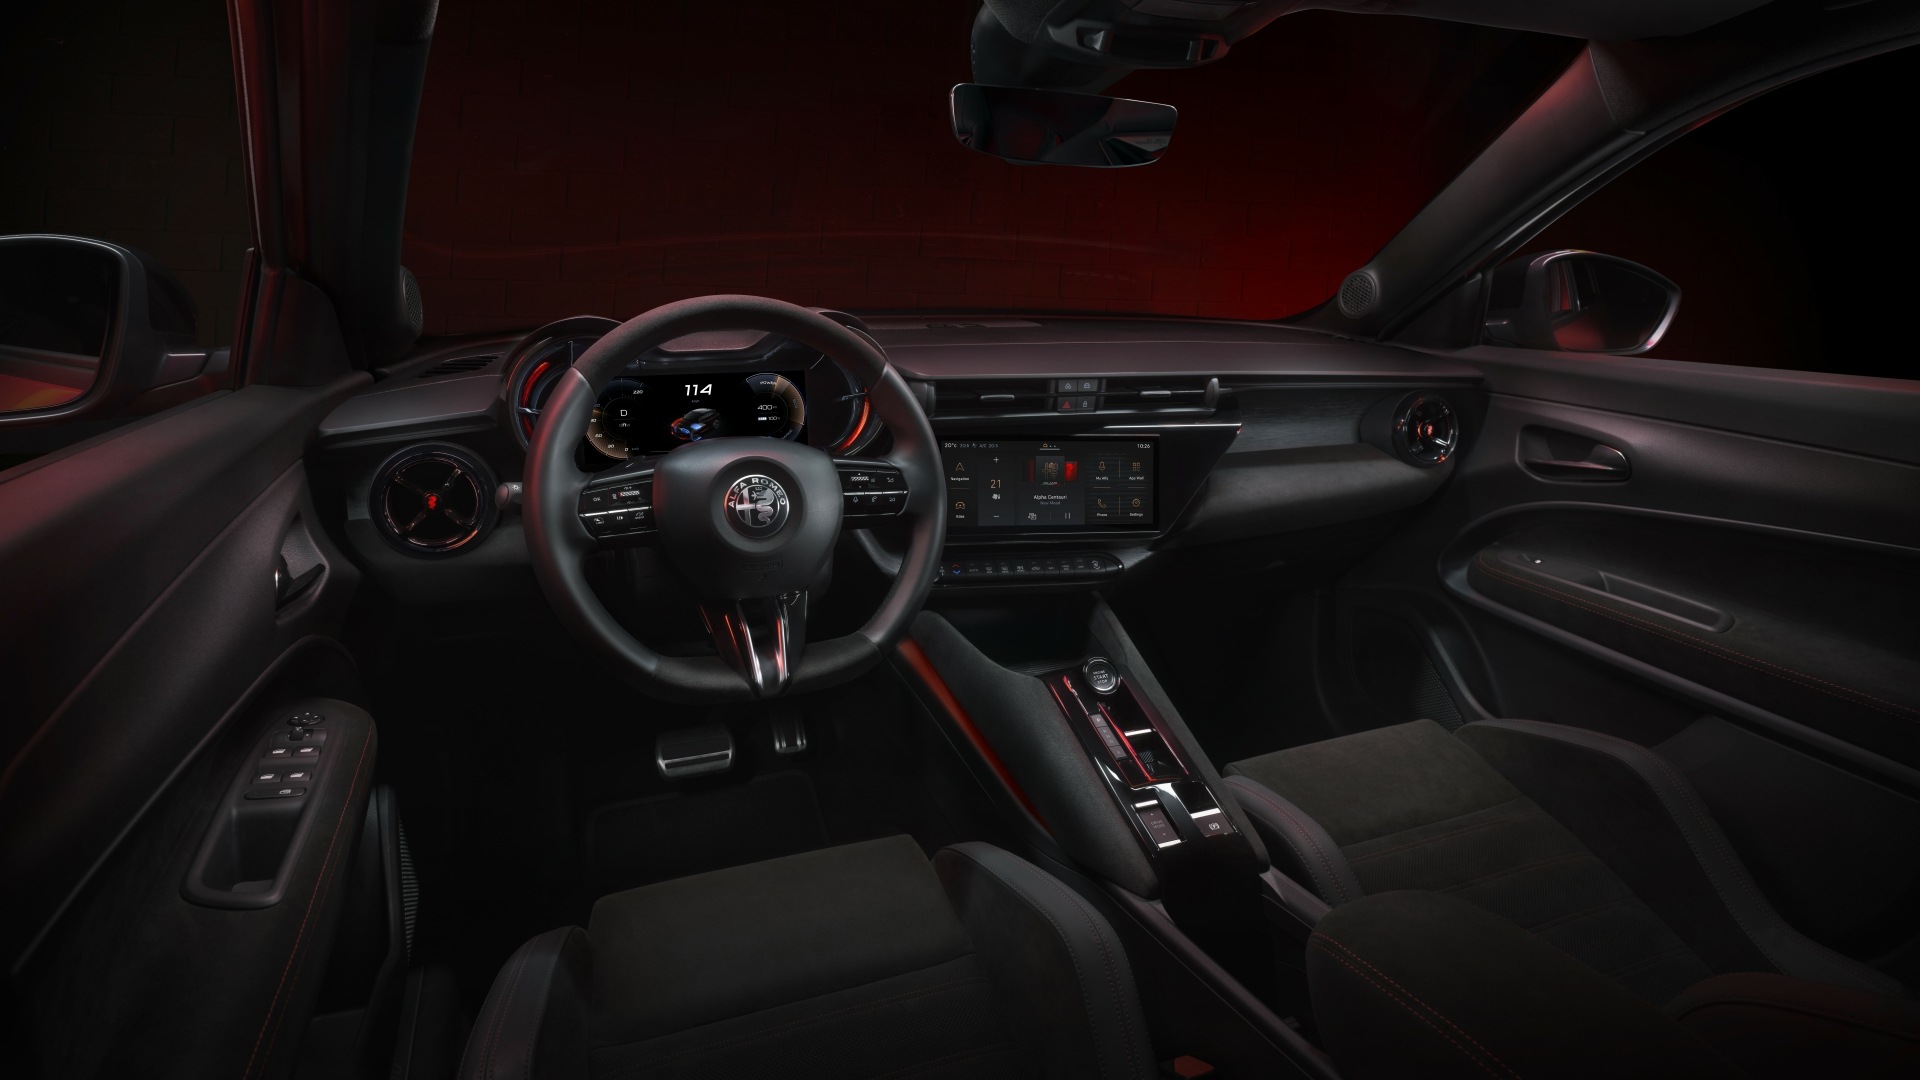 The Interior, Steering, Dashboard, And Central Console Of An Alfa Romeo Milano (Credits: Stellantis Communications)